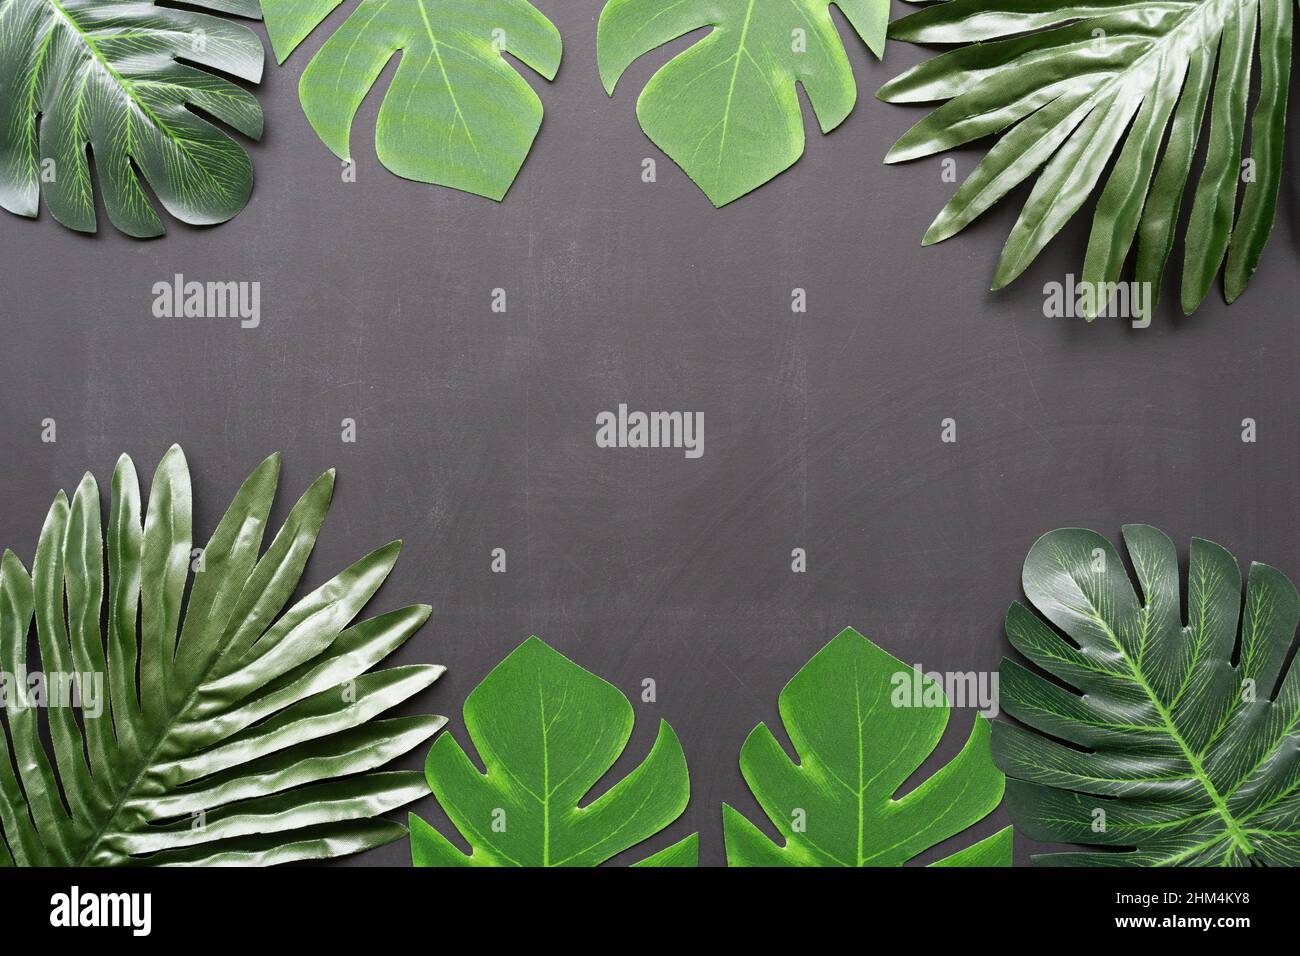 Artificial leaves on a blackboard background flatlay, with space for copy, in a dark botanical style. Stock Photo